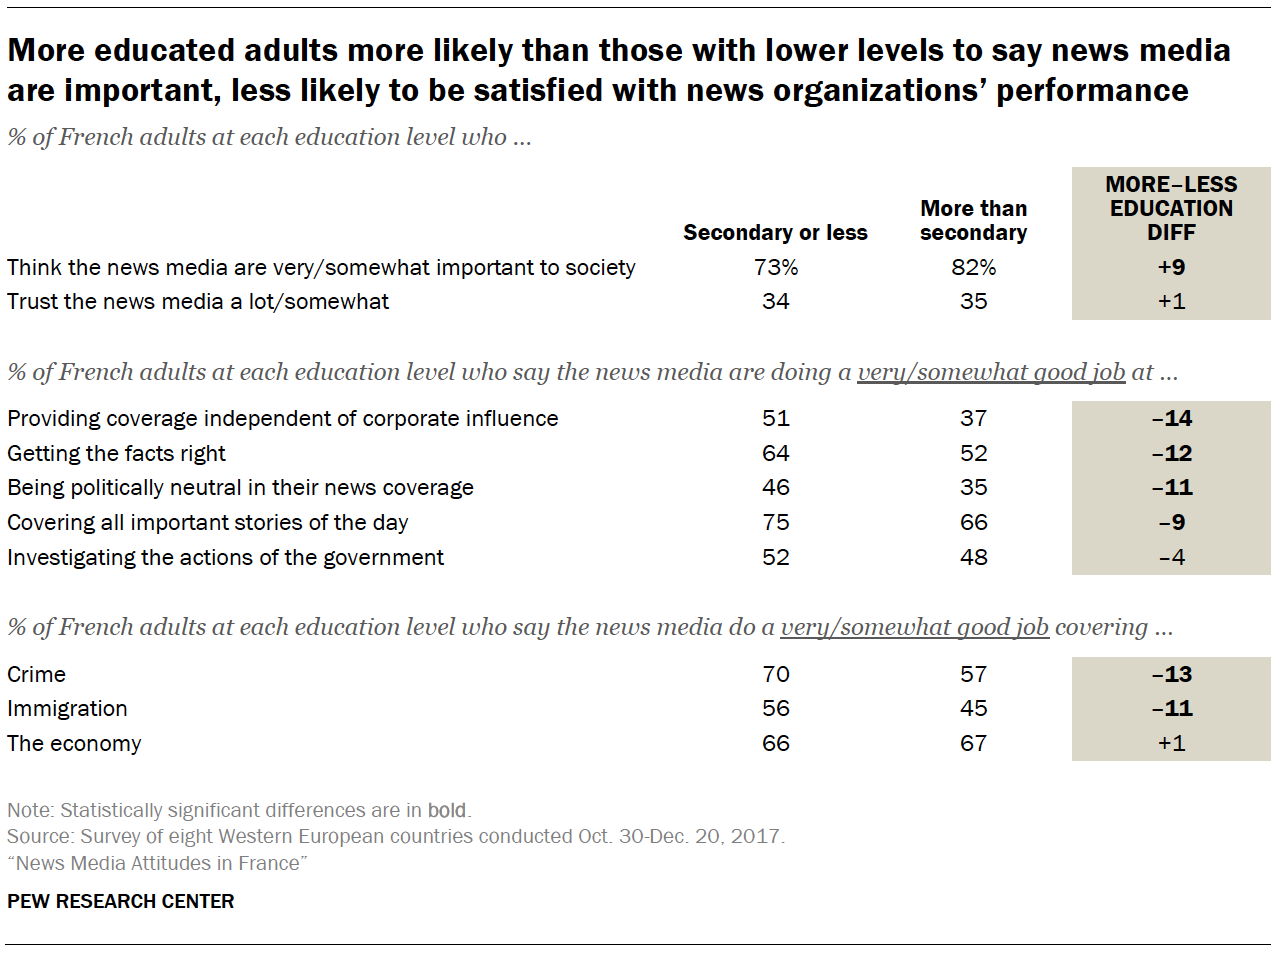 More educated adults more likely than those with lower levels to say news media are important, less likely to be satisfied with news organizations' performance